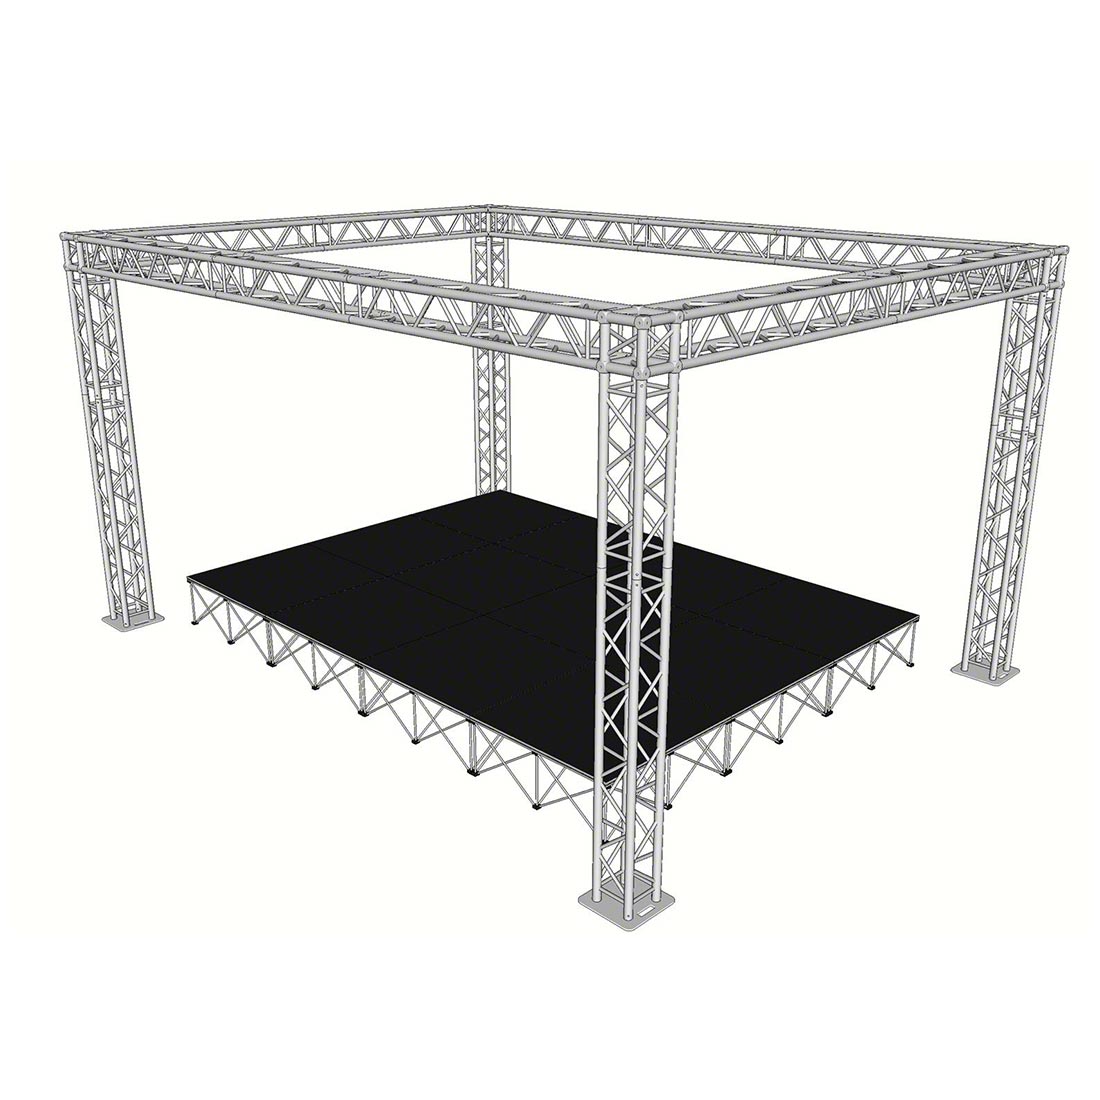 Truss Kit for 12'x16' Stages